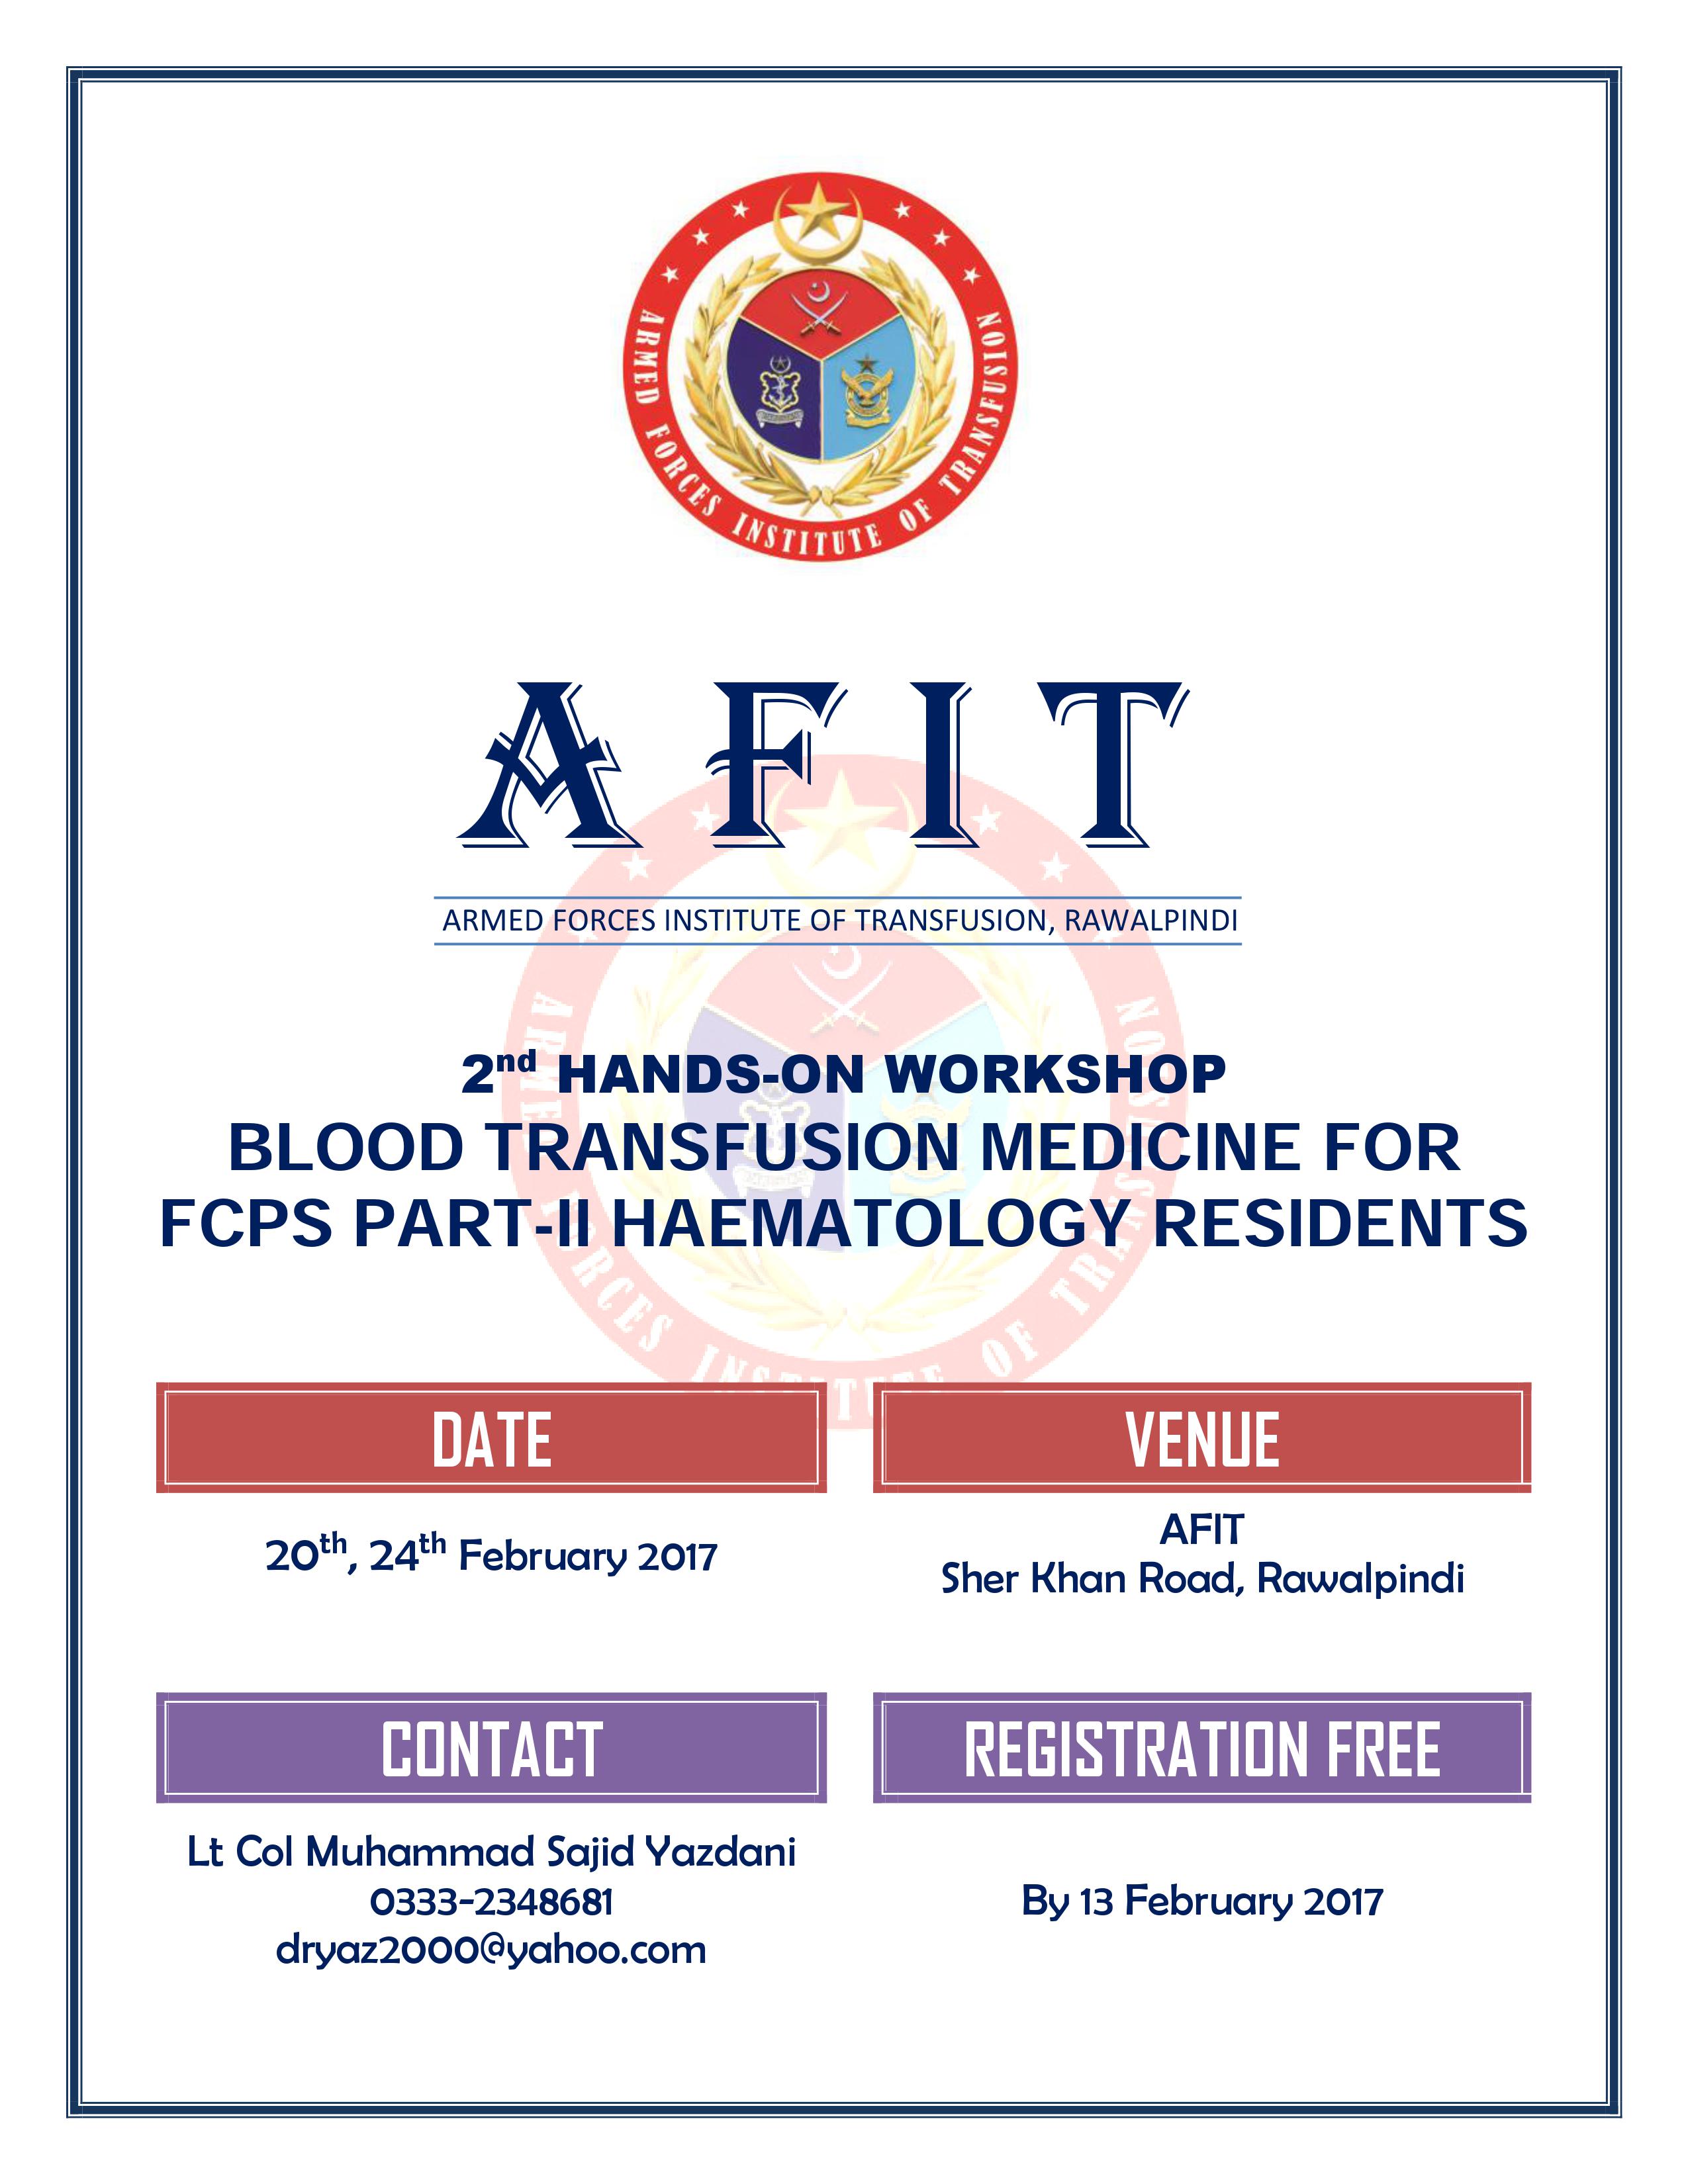 [PSH Workshop] 2nd Hands-On Blood Transfusion Medicine for FCPS Part-II Haematology Residents - 20-24 Feb 2017